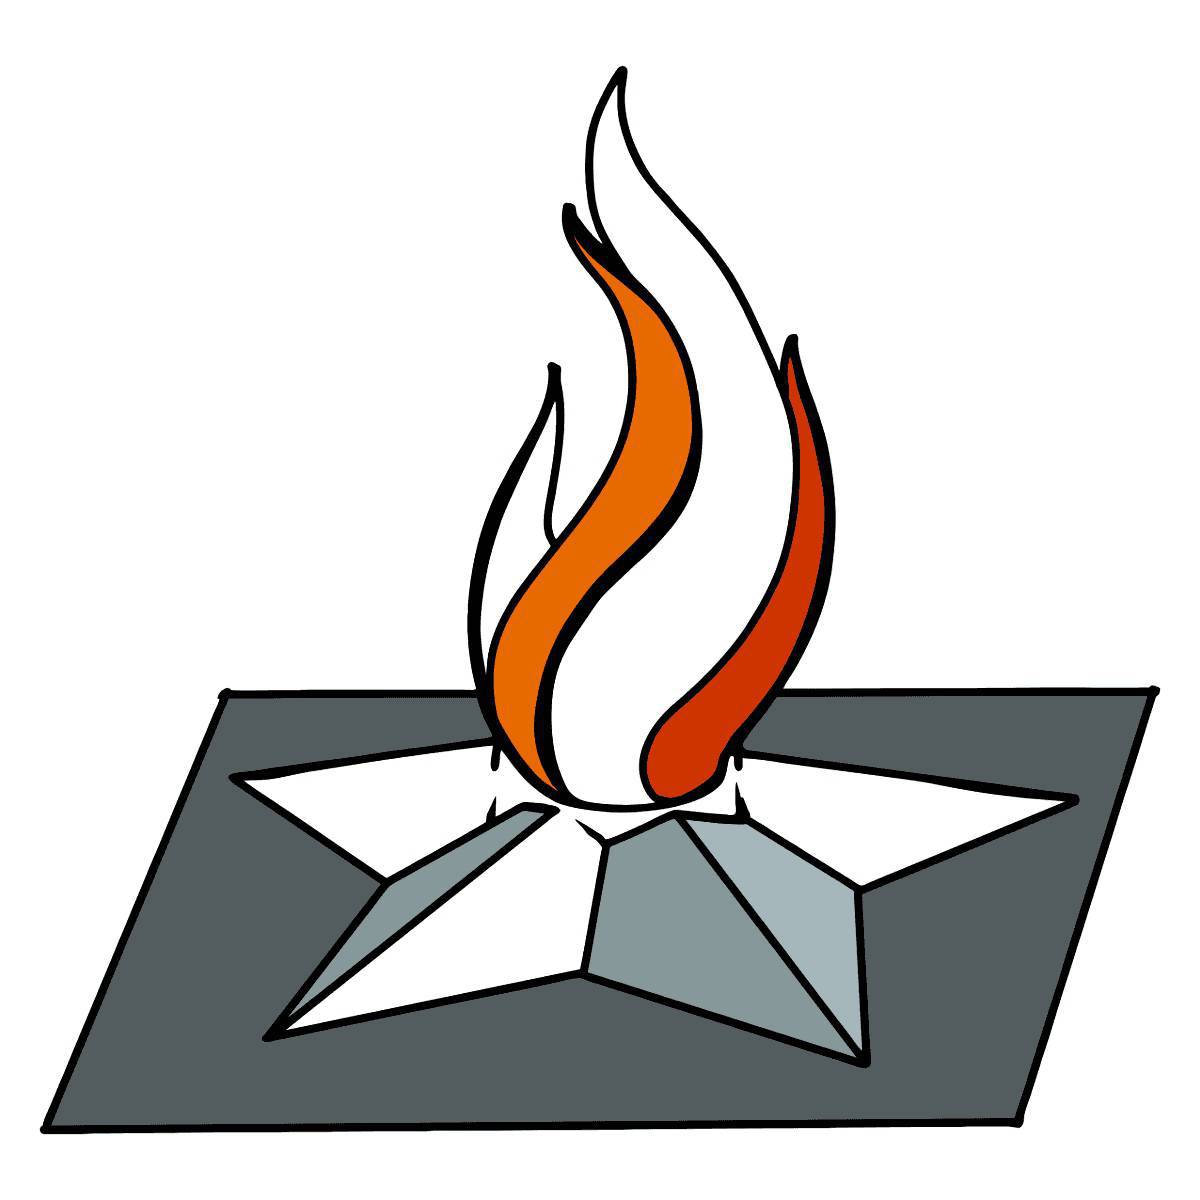 Brightly colored eternal flame coloring page for kids